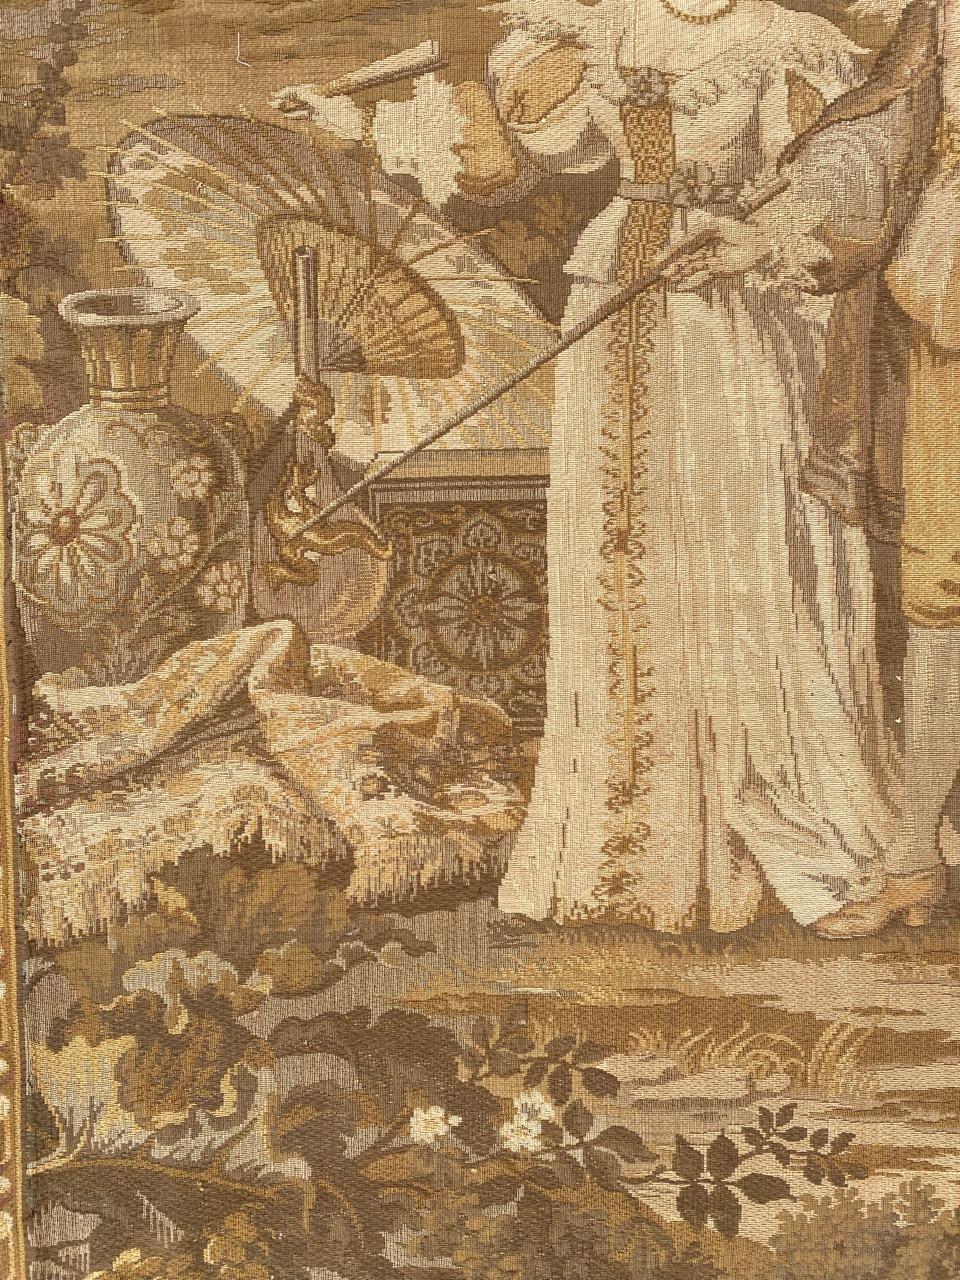 Aubusson Pretty Antique French Jaquar Tapestry